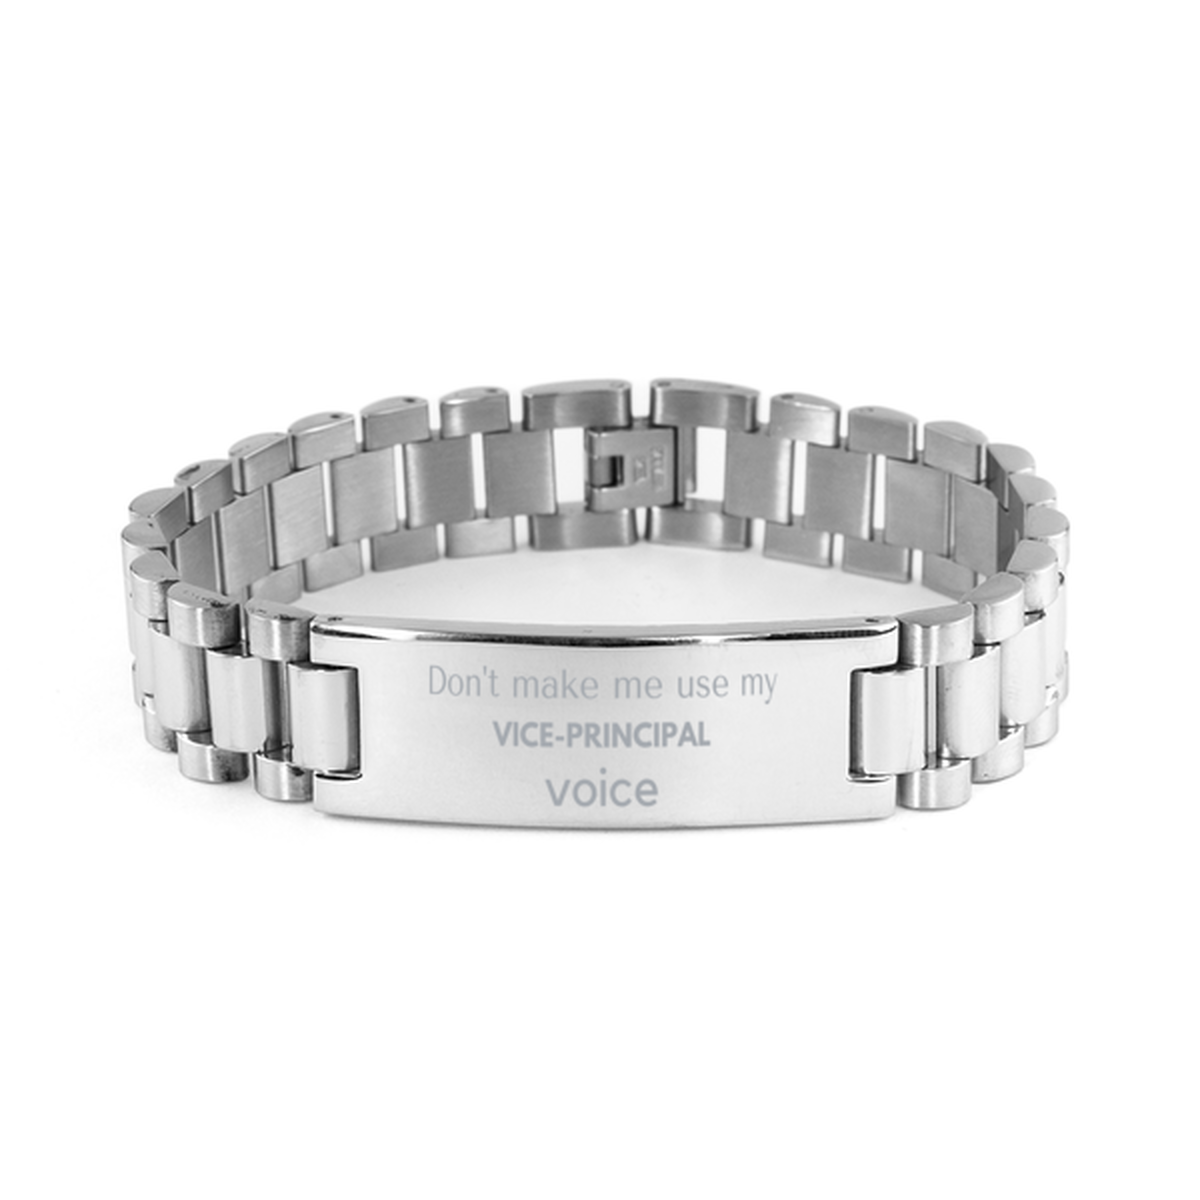 Don't make me use my Vice-principal voice, Sarcasm Vice-principal Gifts, Christmas Vice-principal Ladder Stainless Steel Bracelet Birthday Unique Gifts For Vice-principal Coworkers, Men, Women, Colleague, Friends